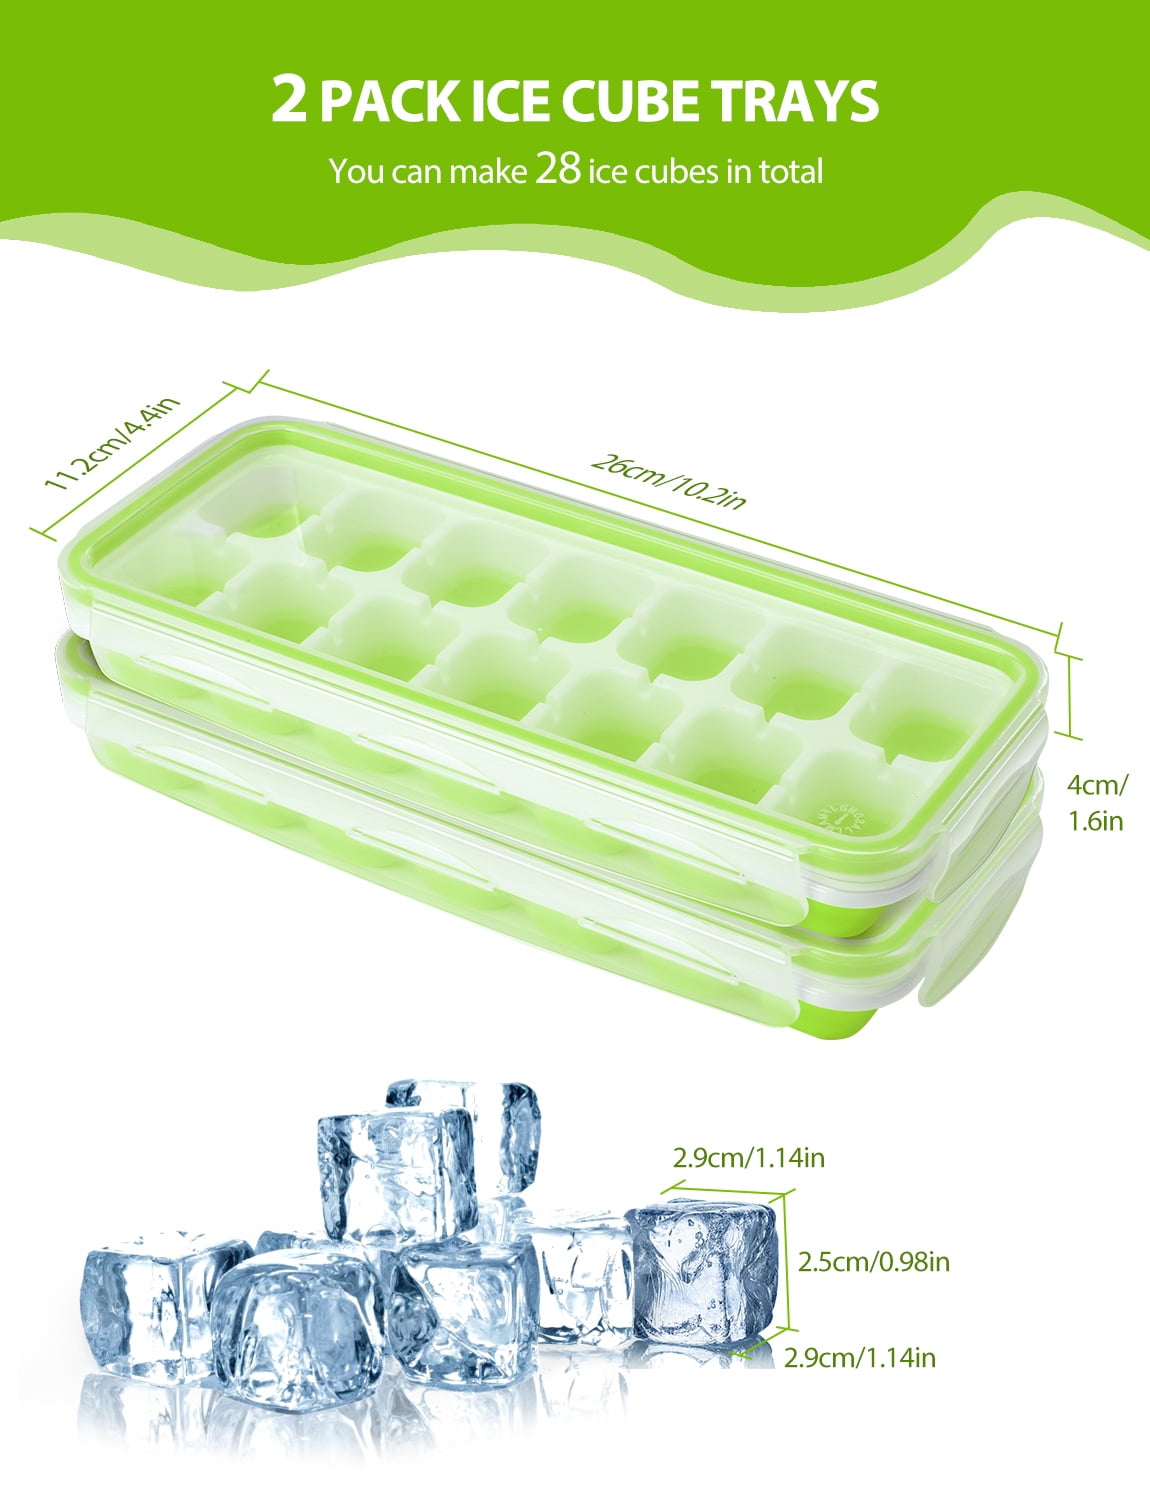 Ofspeizc Mini Ice Cube Trays 2 Pack, Crushed Ice Tray for Freezer, Easy Release Small Ice Cube Tray